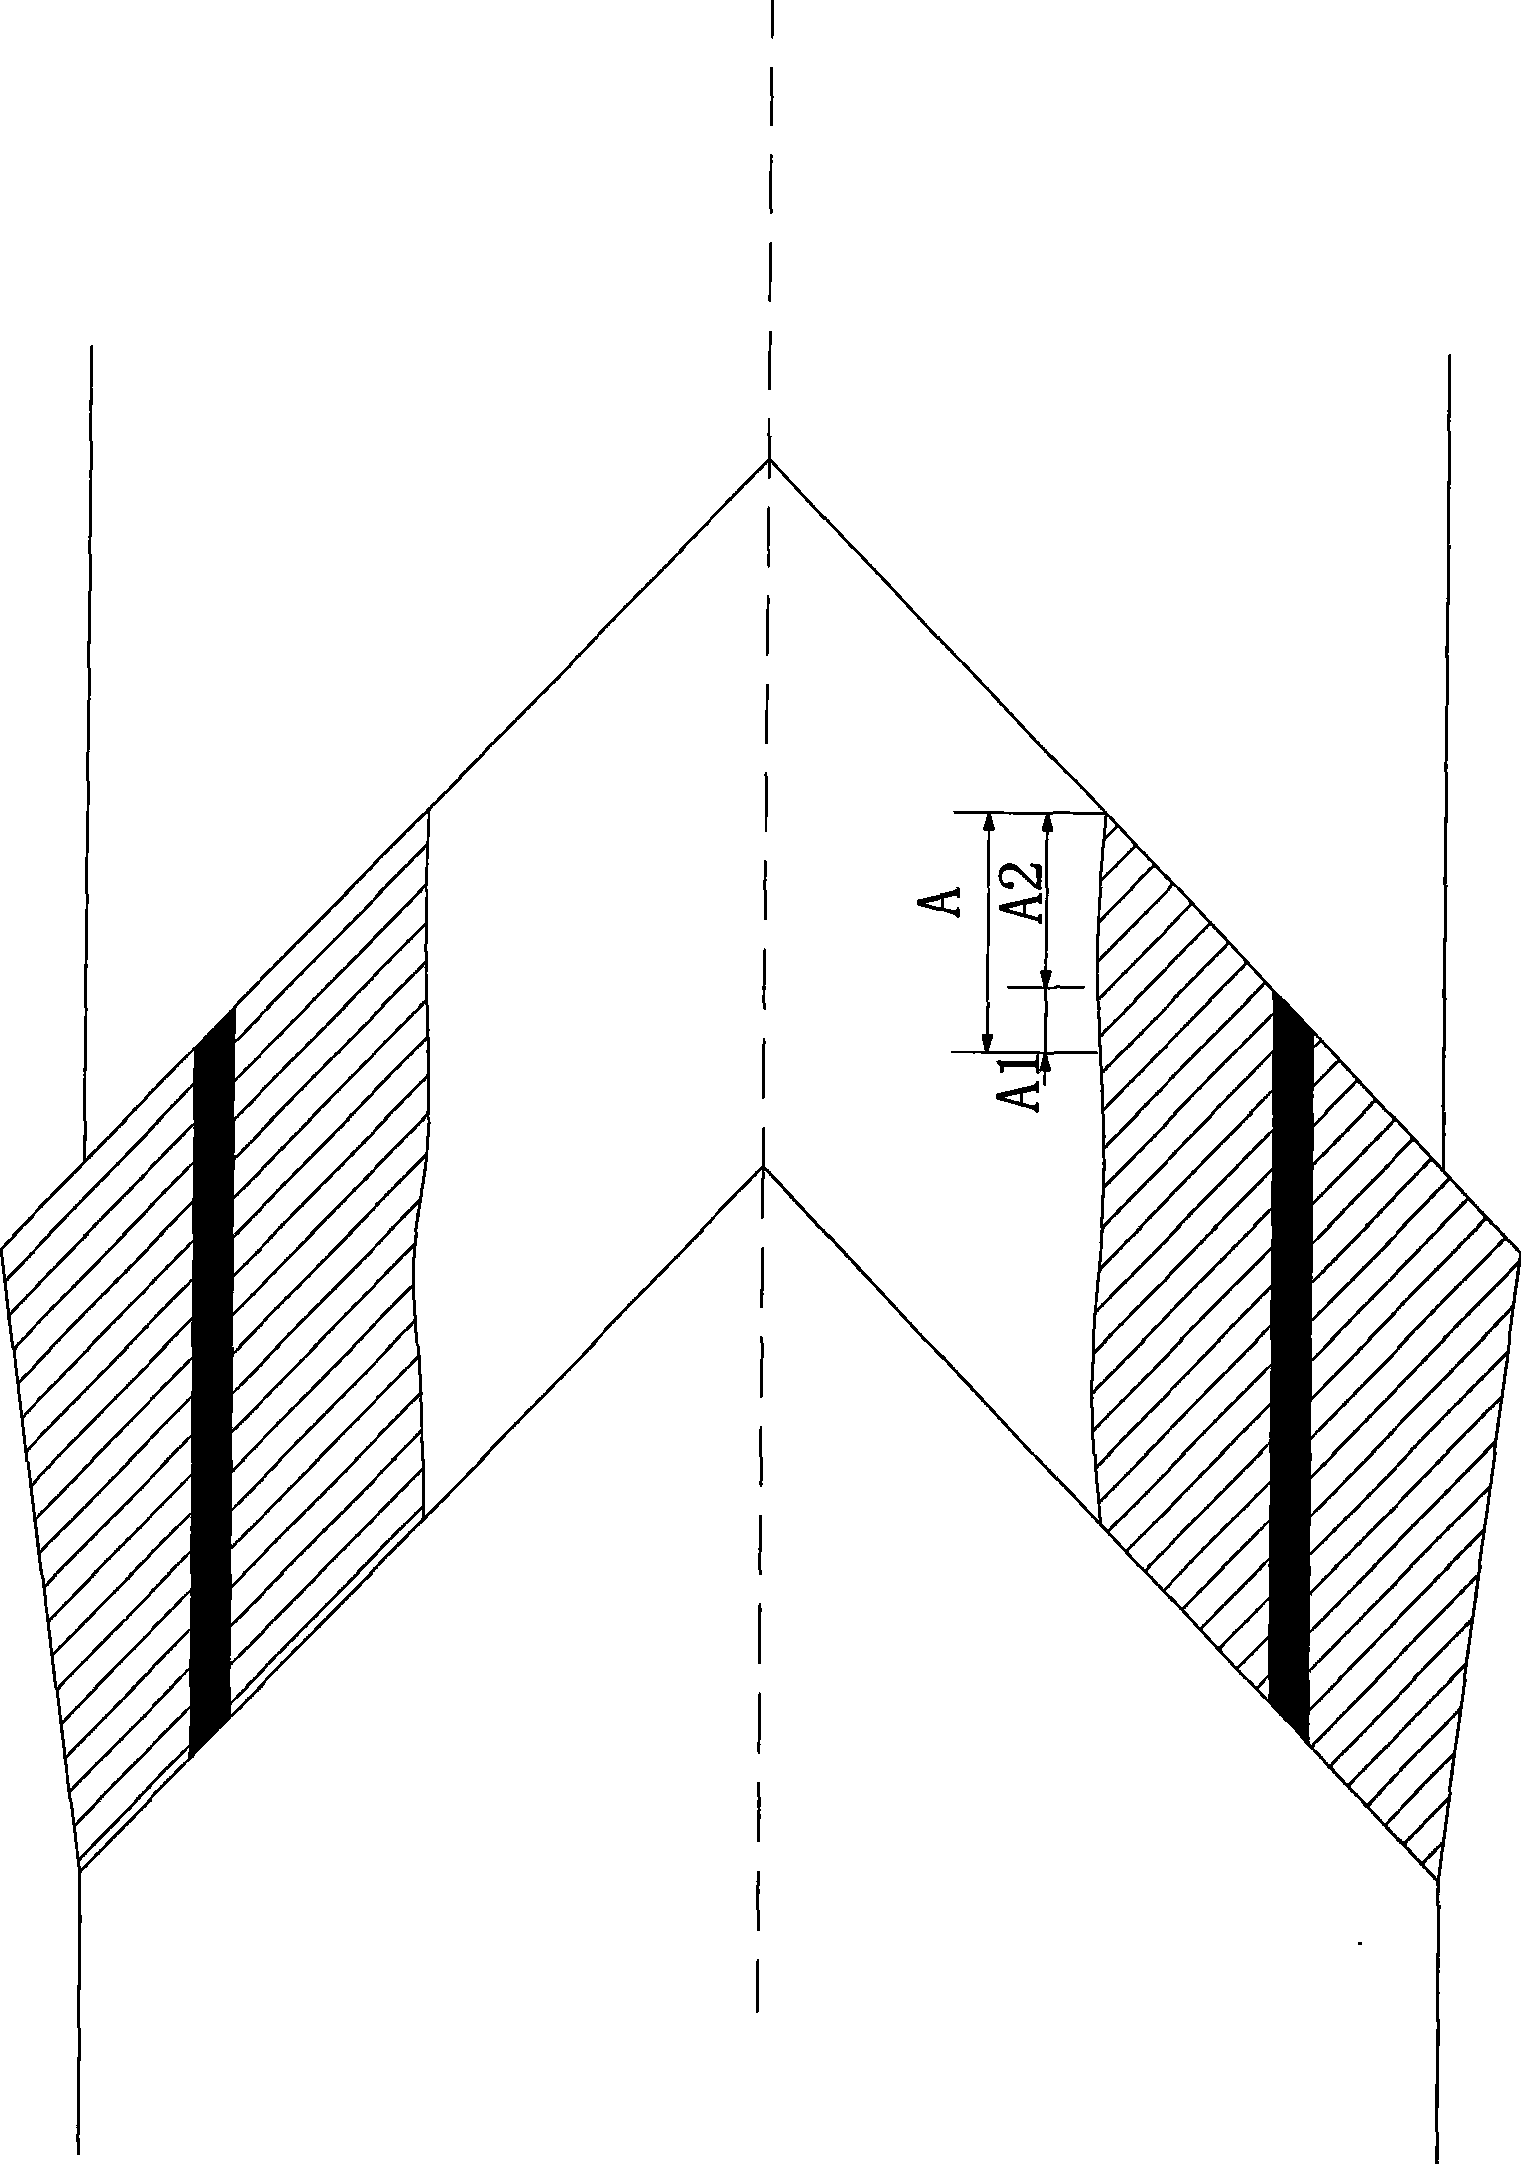 Application method for horizontal V-shaped tunnel face for digging tunnel